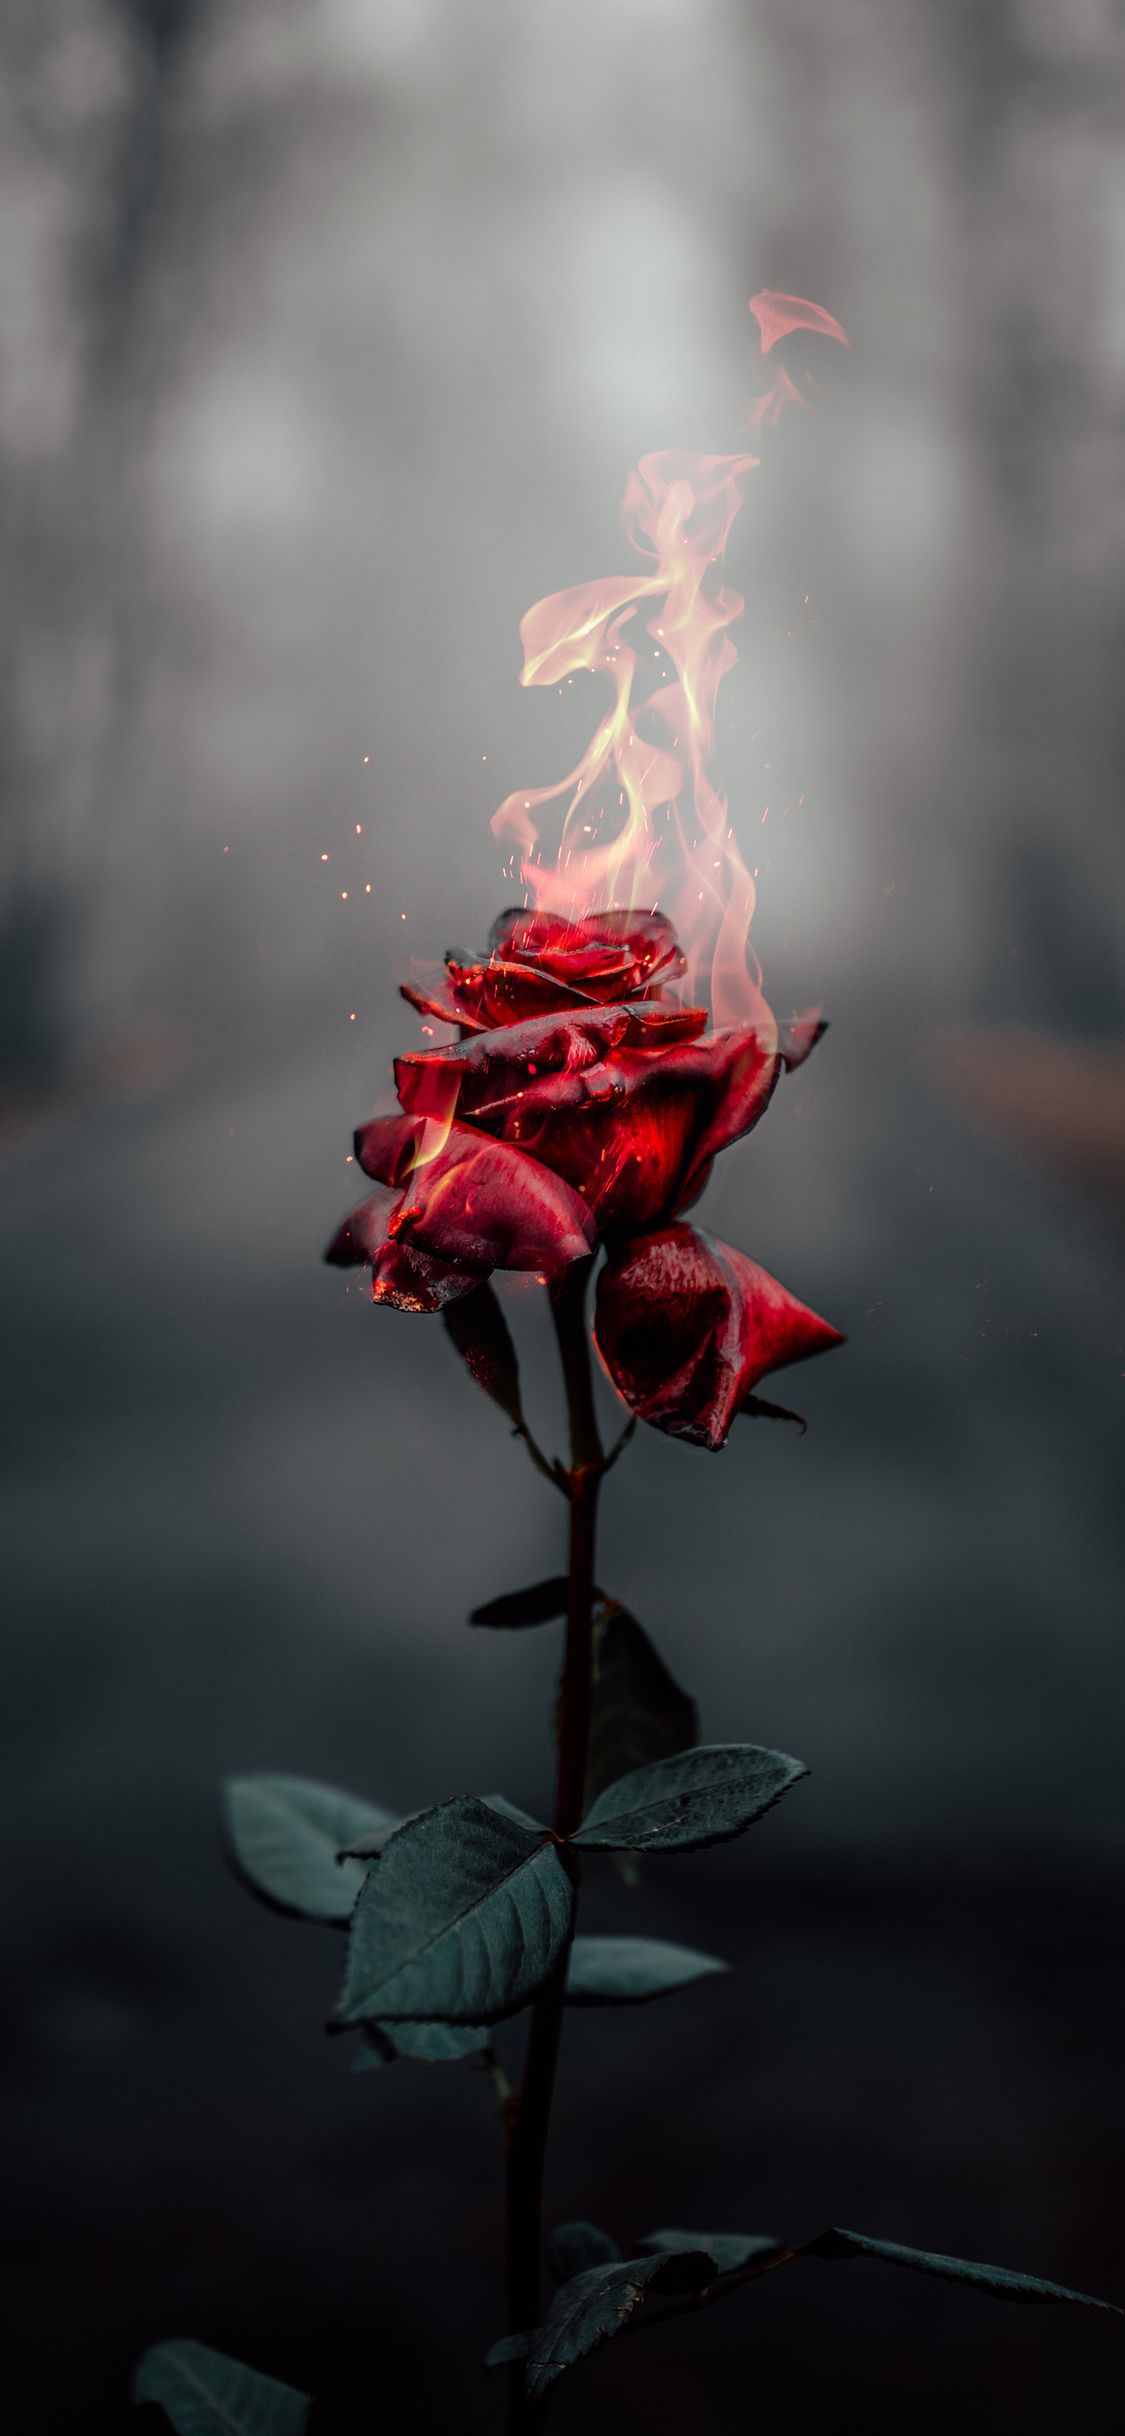 Burning Rose 4k iPhone XS, iPhone iPhone X HD 4k Wallpaper, Image, Background, Photo and Picture